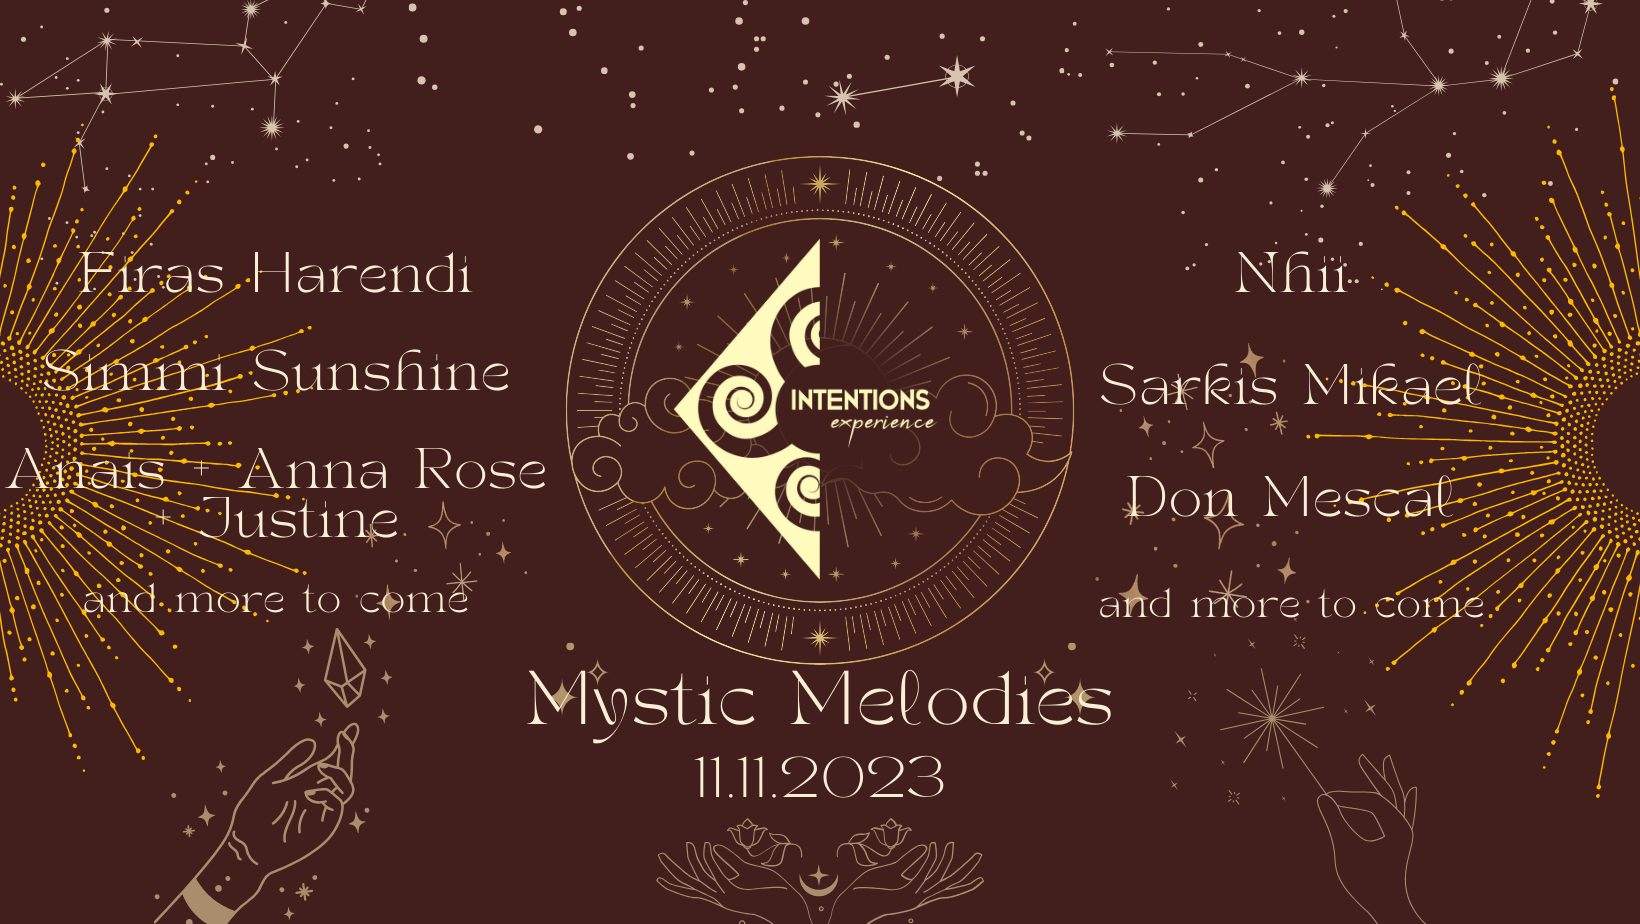 Intentions Experience: Mystic Melodies w/Nhii, Sarkis Mikael, Don Mescal - フライヤー表